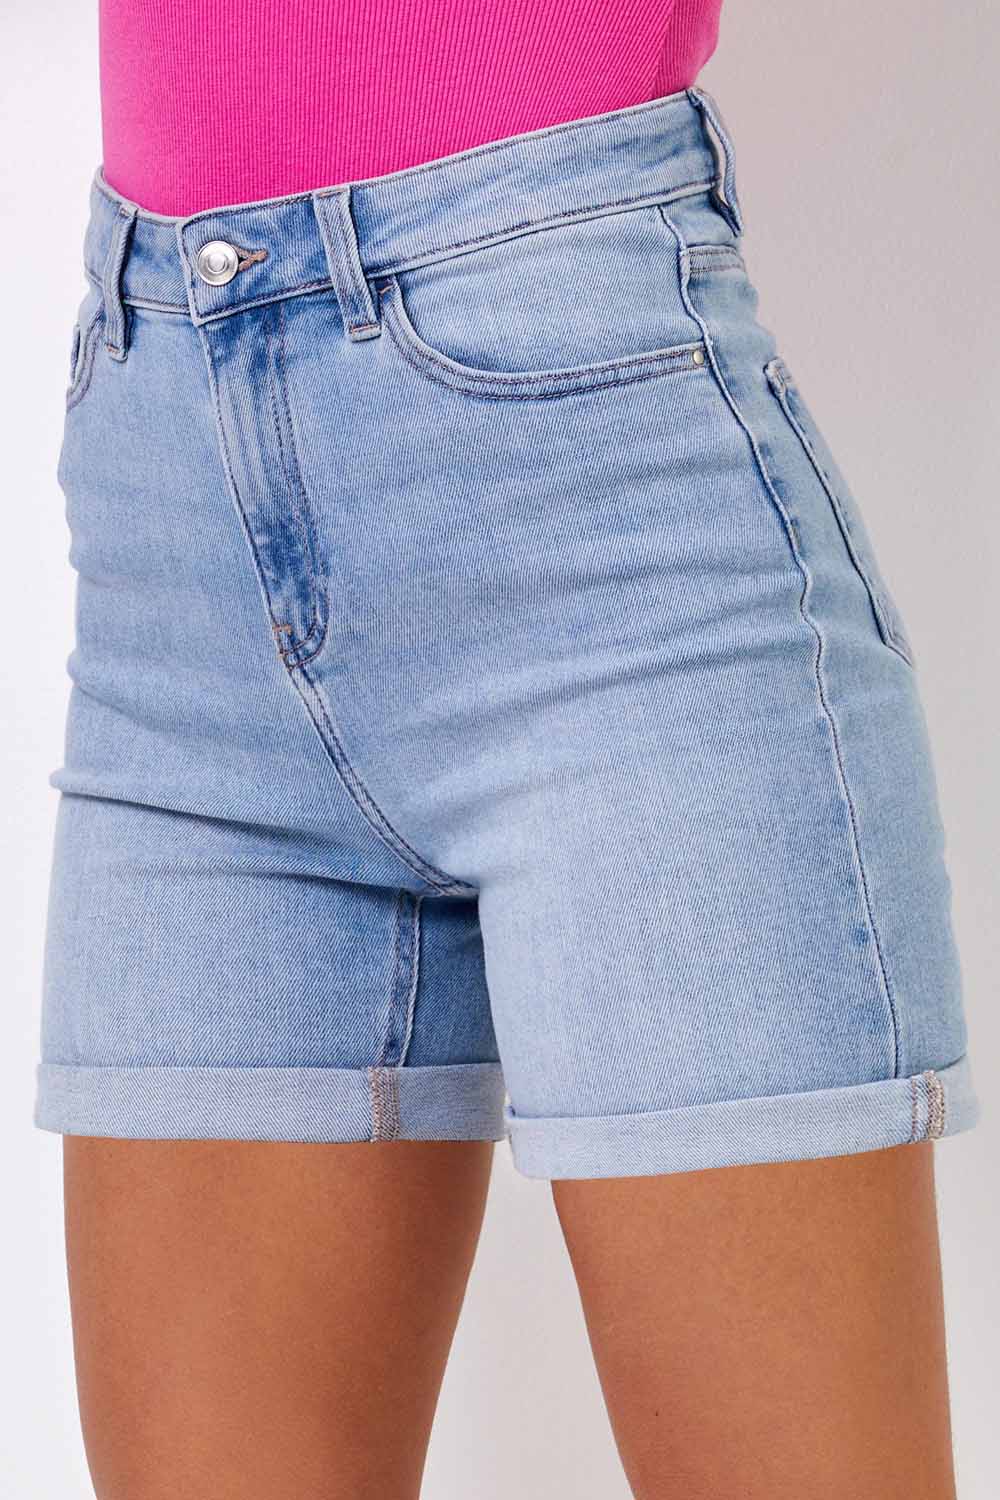 Embrace the Season with High-Waisted Denim Shorts for Women | by Rough and  Tough | Medium